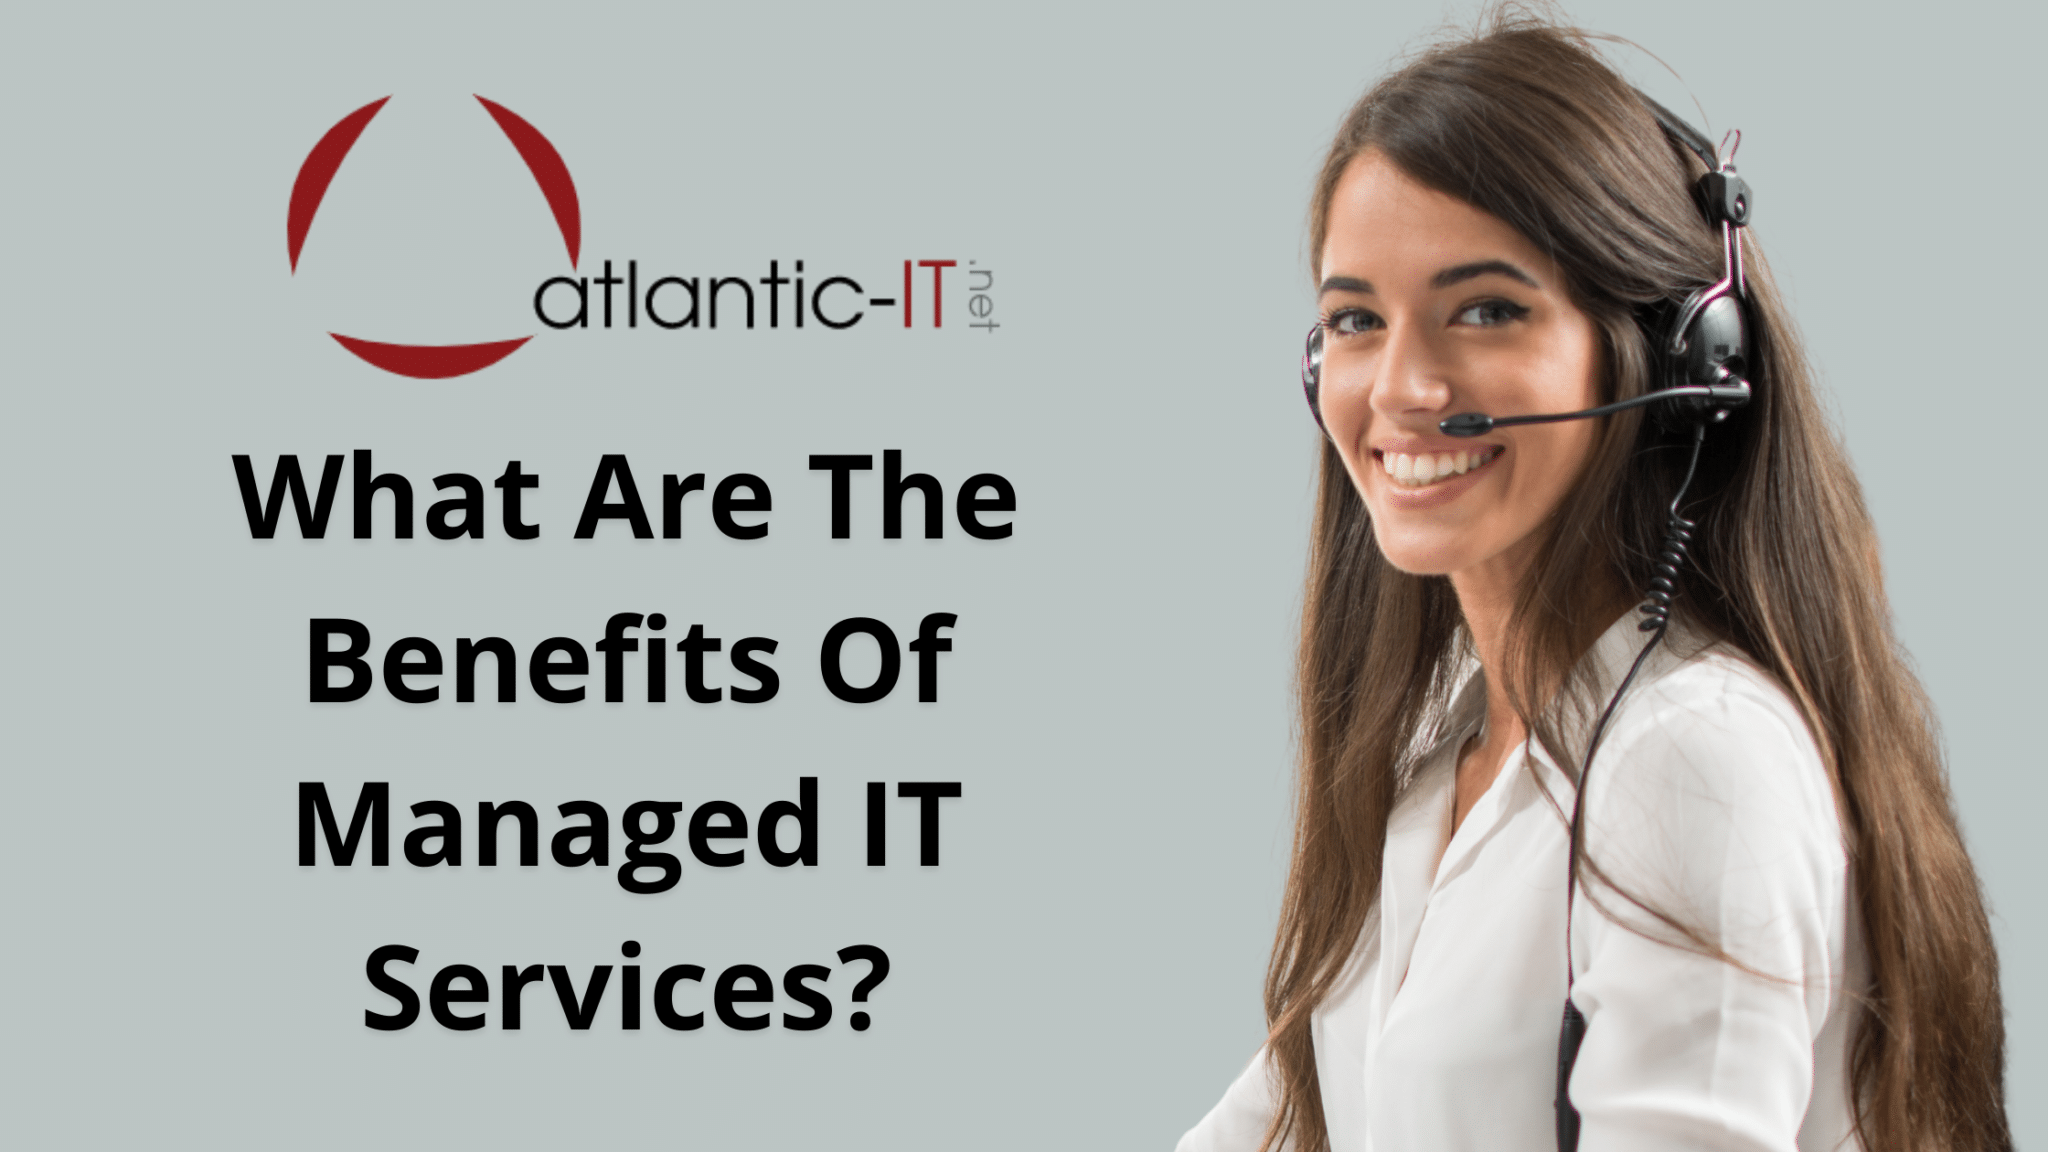 What Are The Benefits Of Managed IT Services?